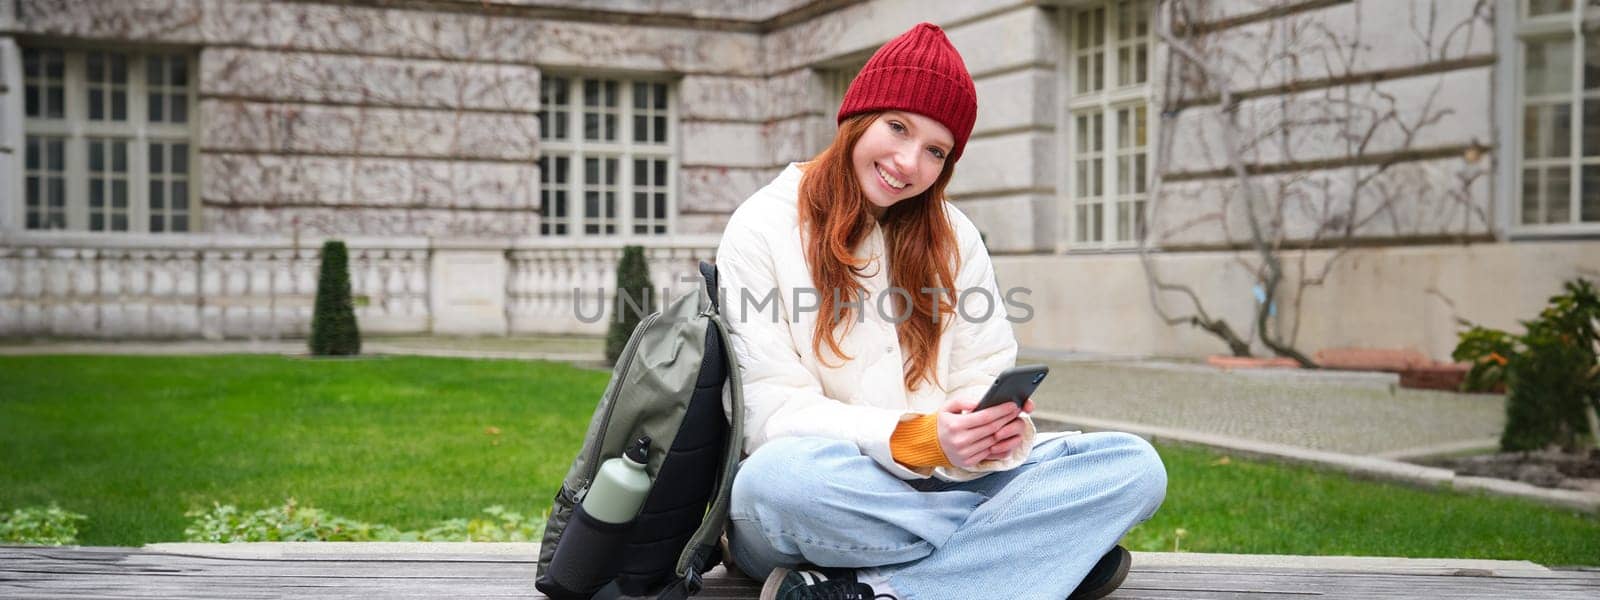 Redhead girl, female student sits with mobile phone on bench in parj, leans on her backpack. Woman browsing social media app feed on her smartphone.